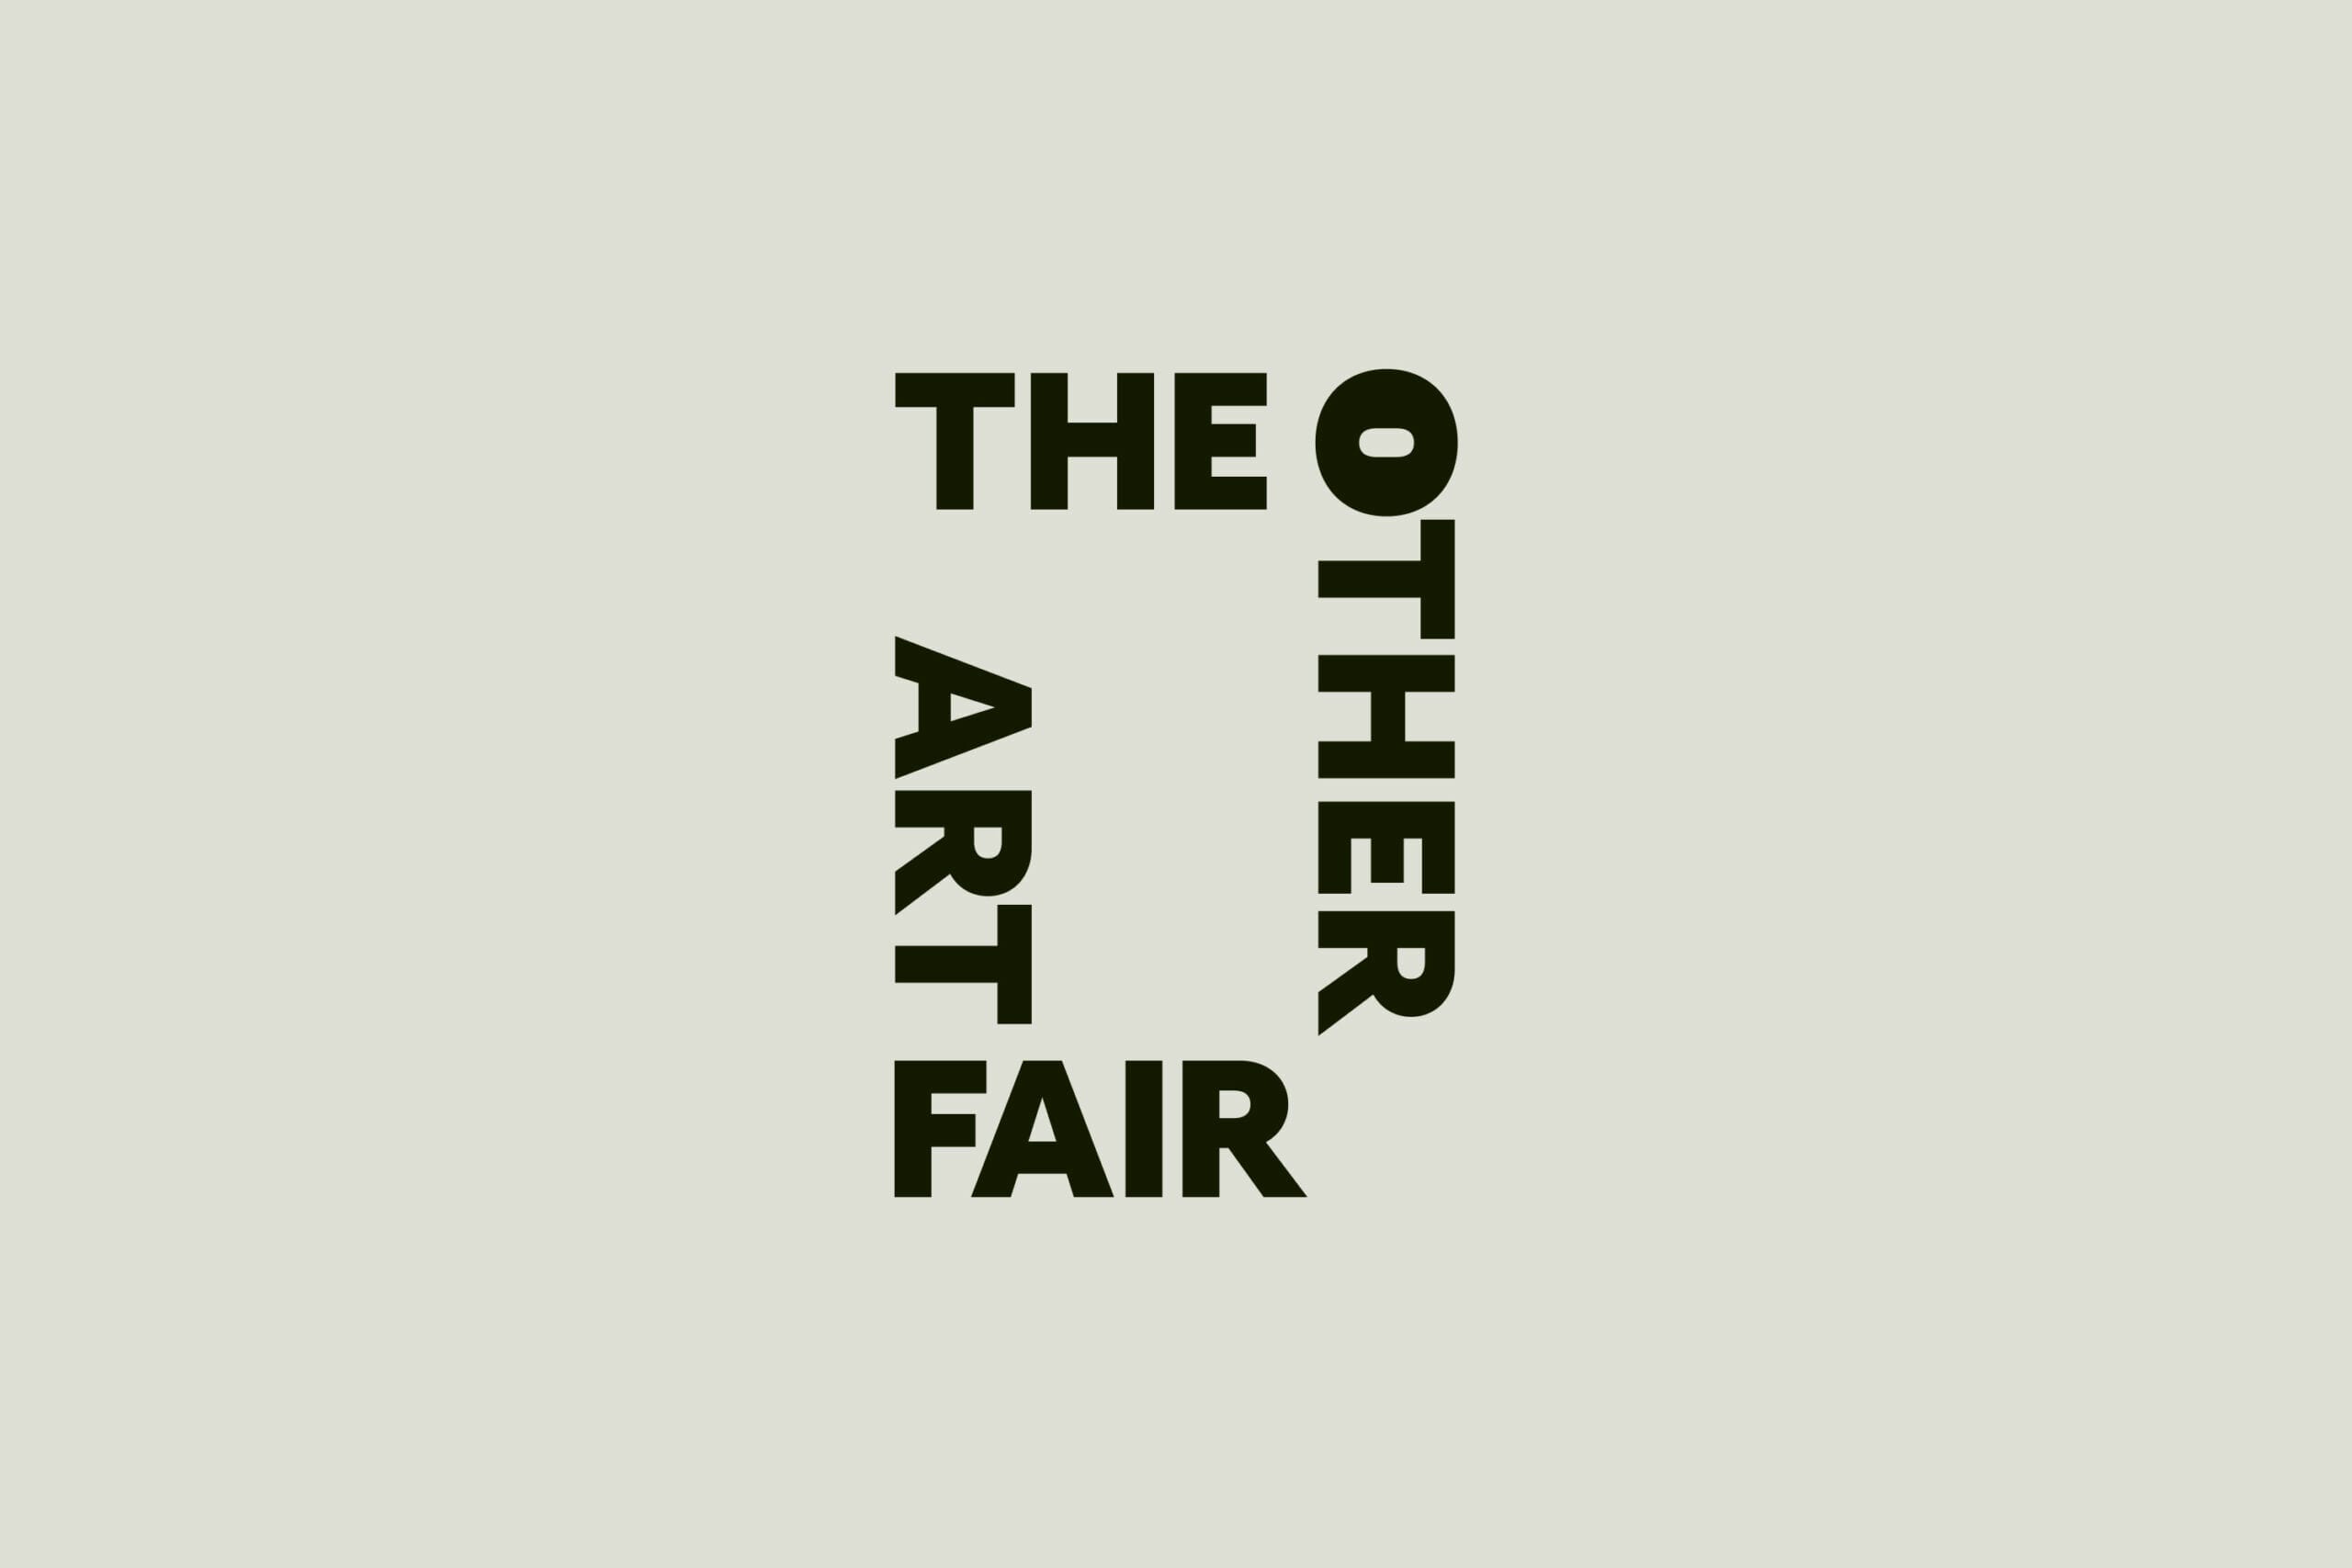 Universal Favourite's rebrand for The Other Art Fair